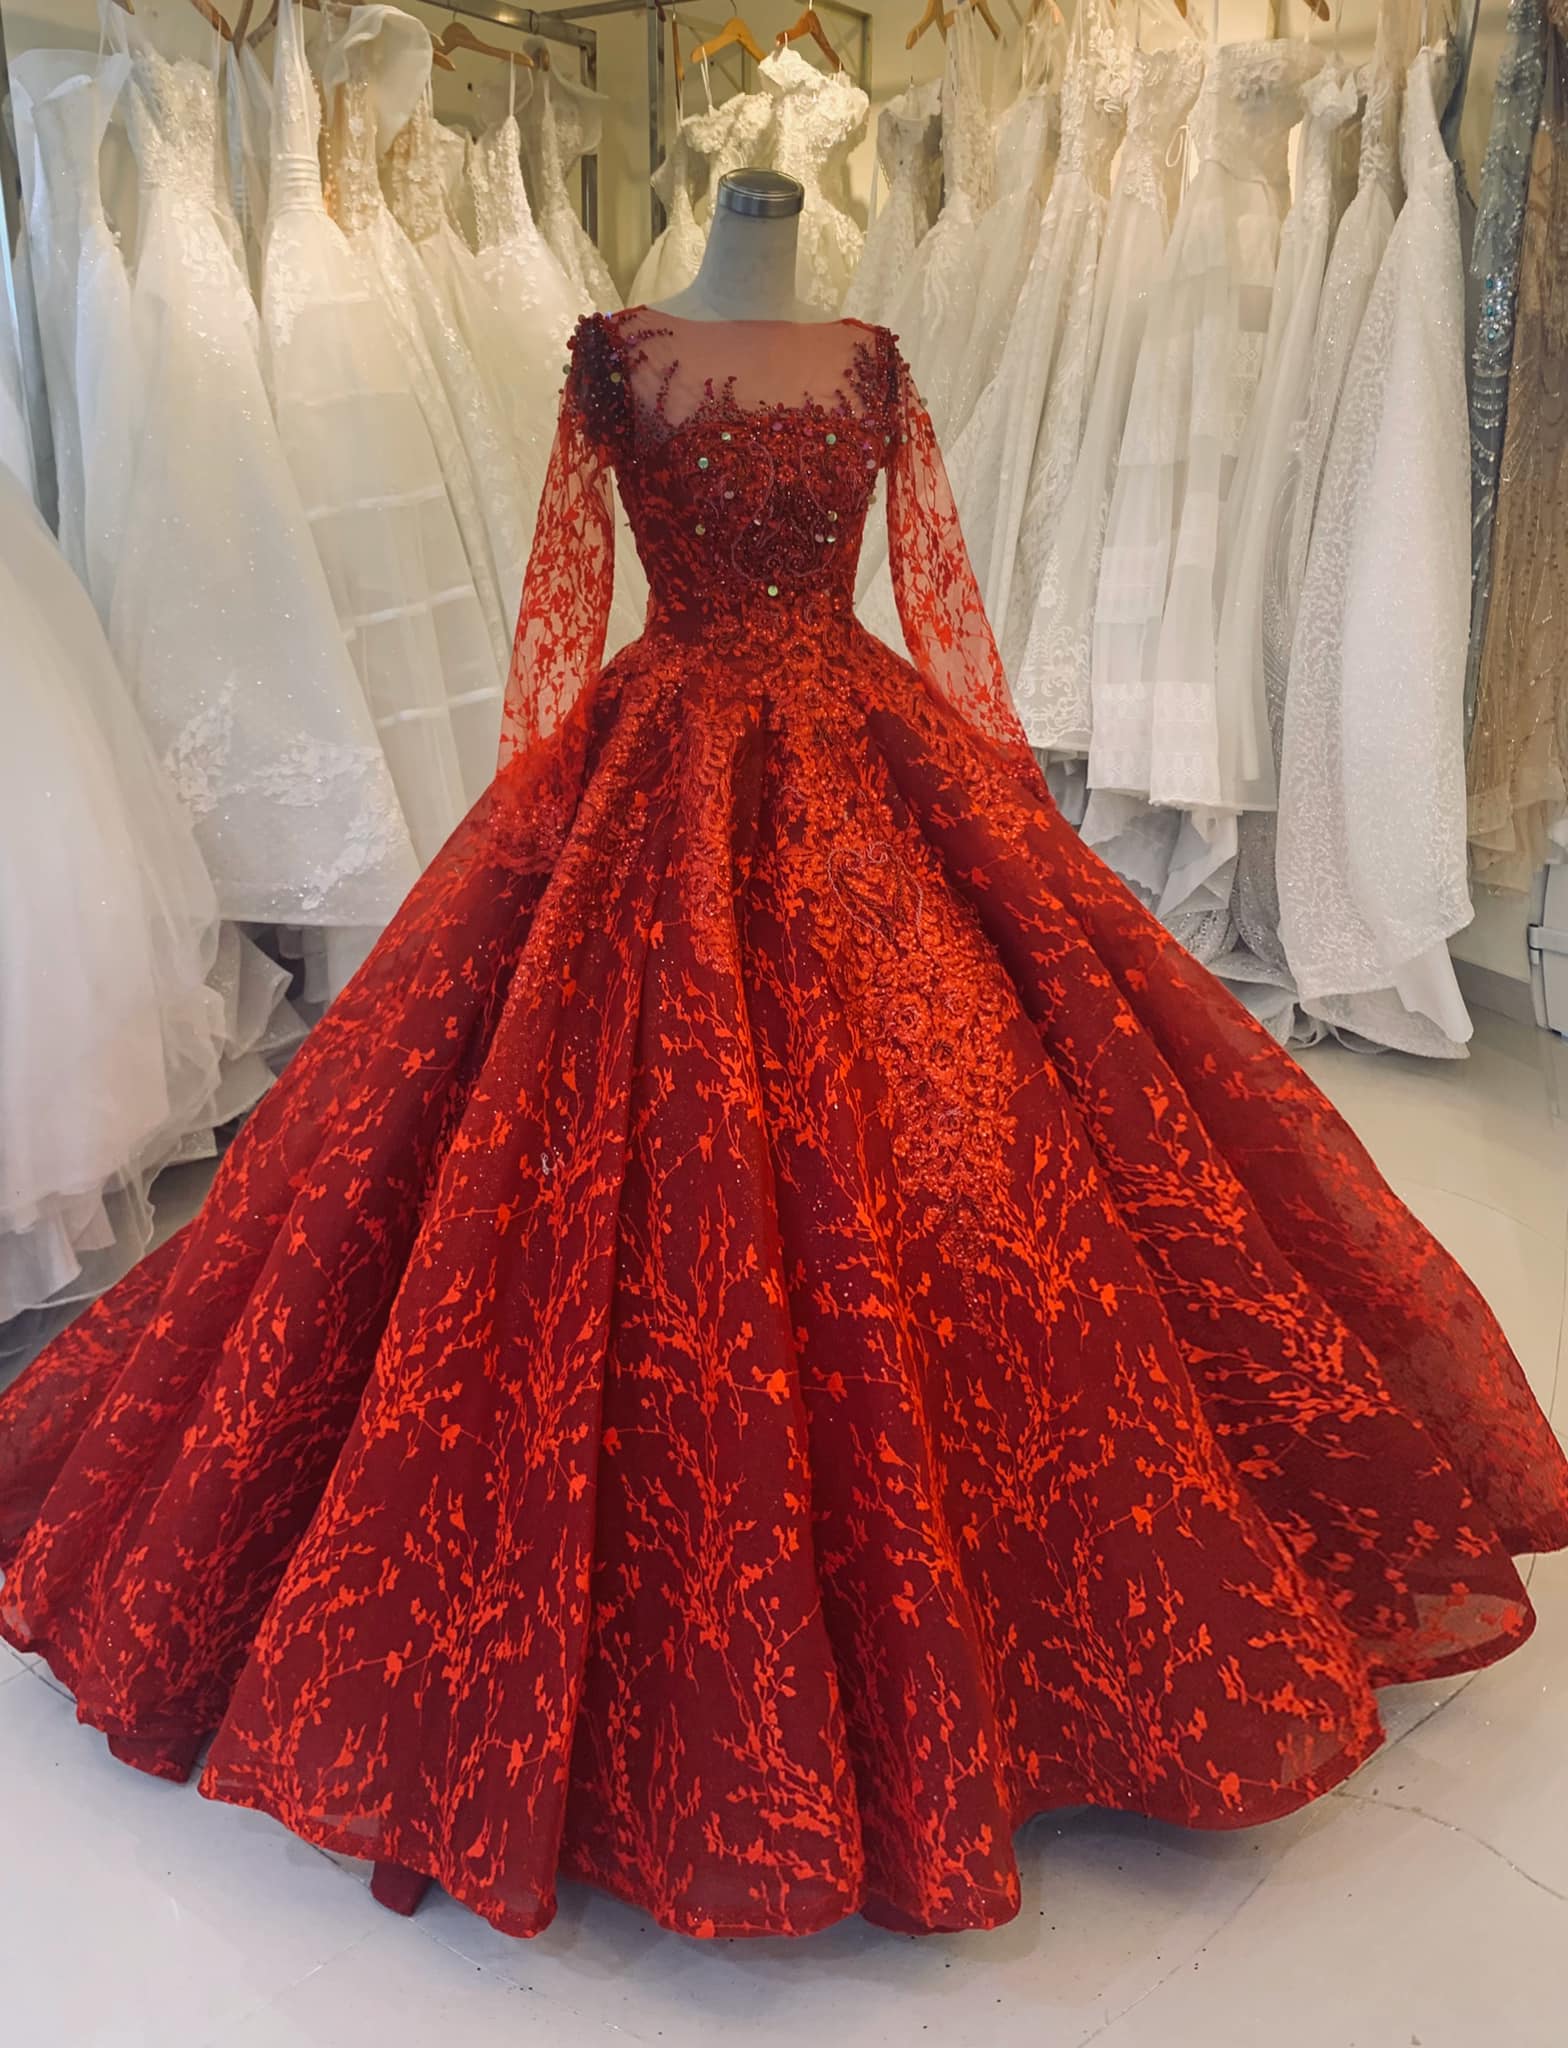 Lady In Red Colored Gown - Love, Fioyo